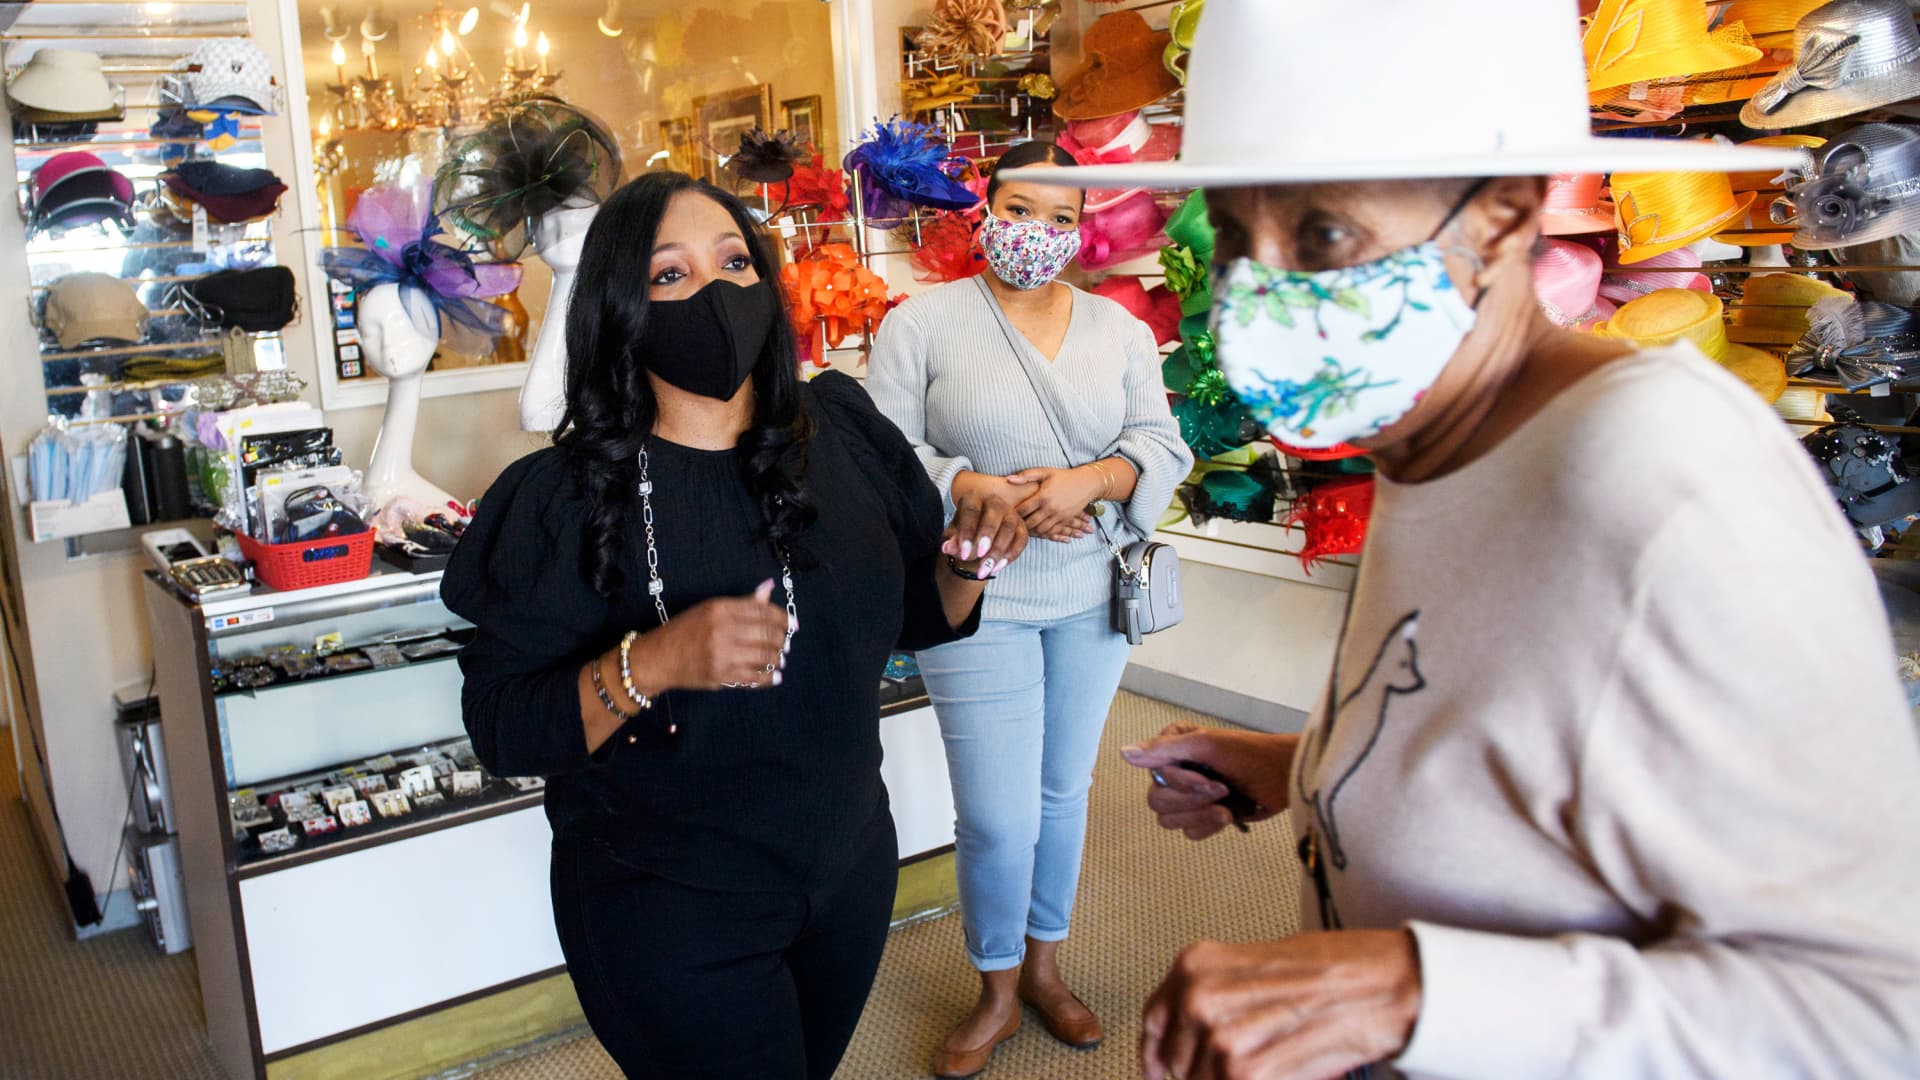 Customer Tamara Jenkins tries on a hat with Meeka Robinson Davis, owner of One-Of-A-Kind Hats, as Davis' daughter Chrstiana Davis looks on, at the store in the Windsor Hills neighborhood of Los Angeles, California, November 24, 2020.